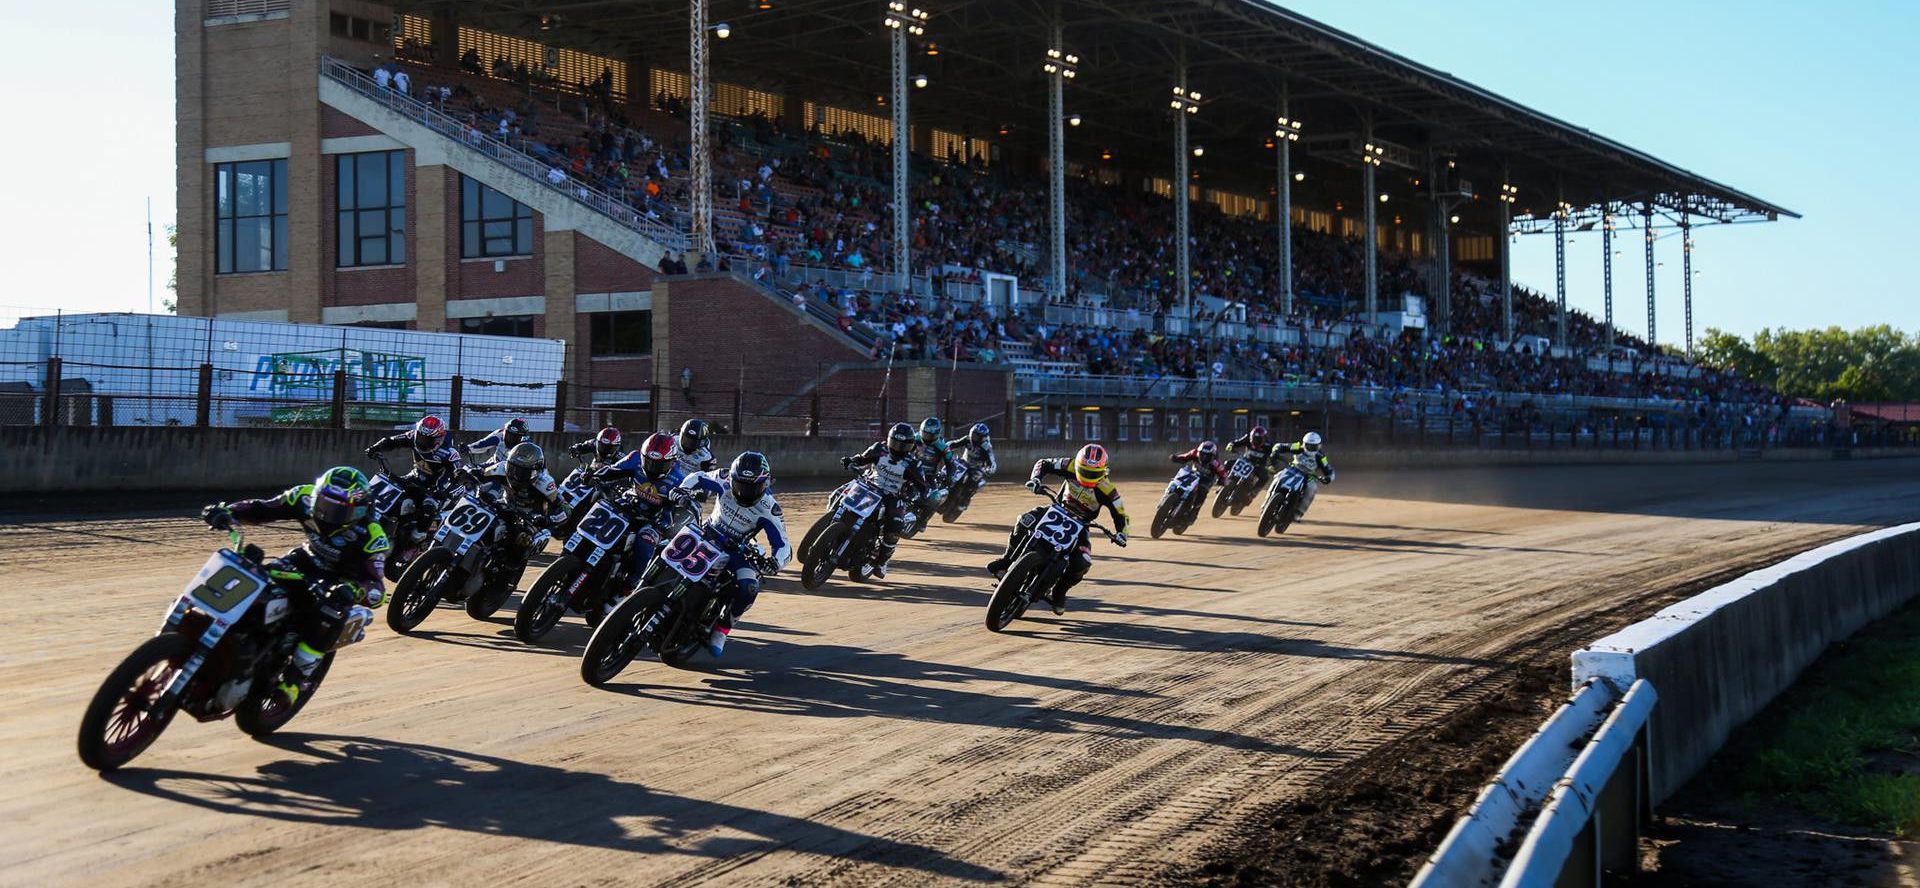 Jared Mees (9) leads the AFT Mission SuperTwins race at Springfield Mile II. Photo by Scott Hunter, courtesy AFT.